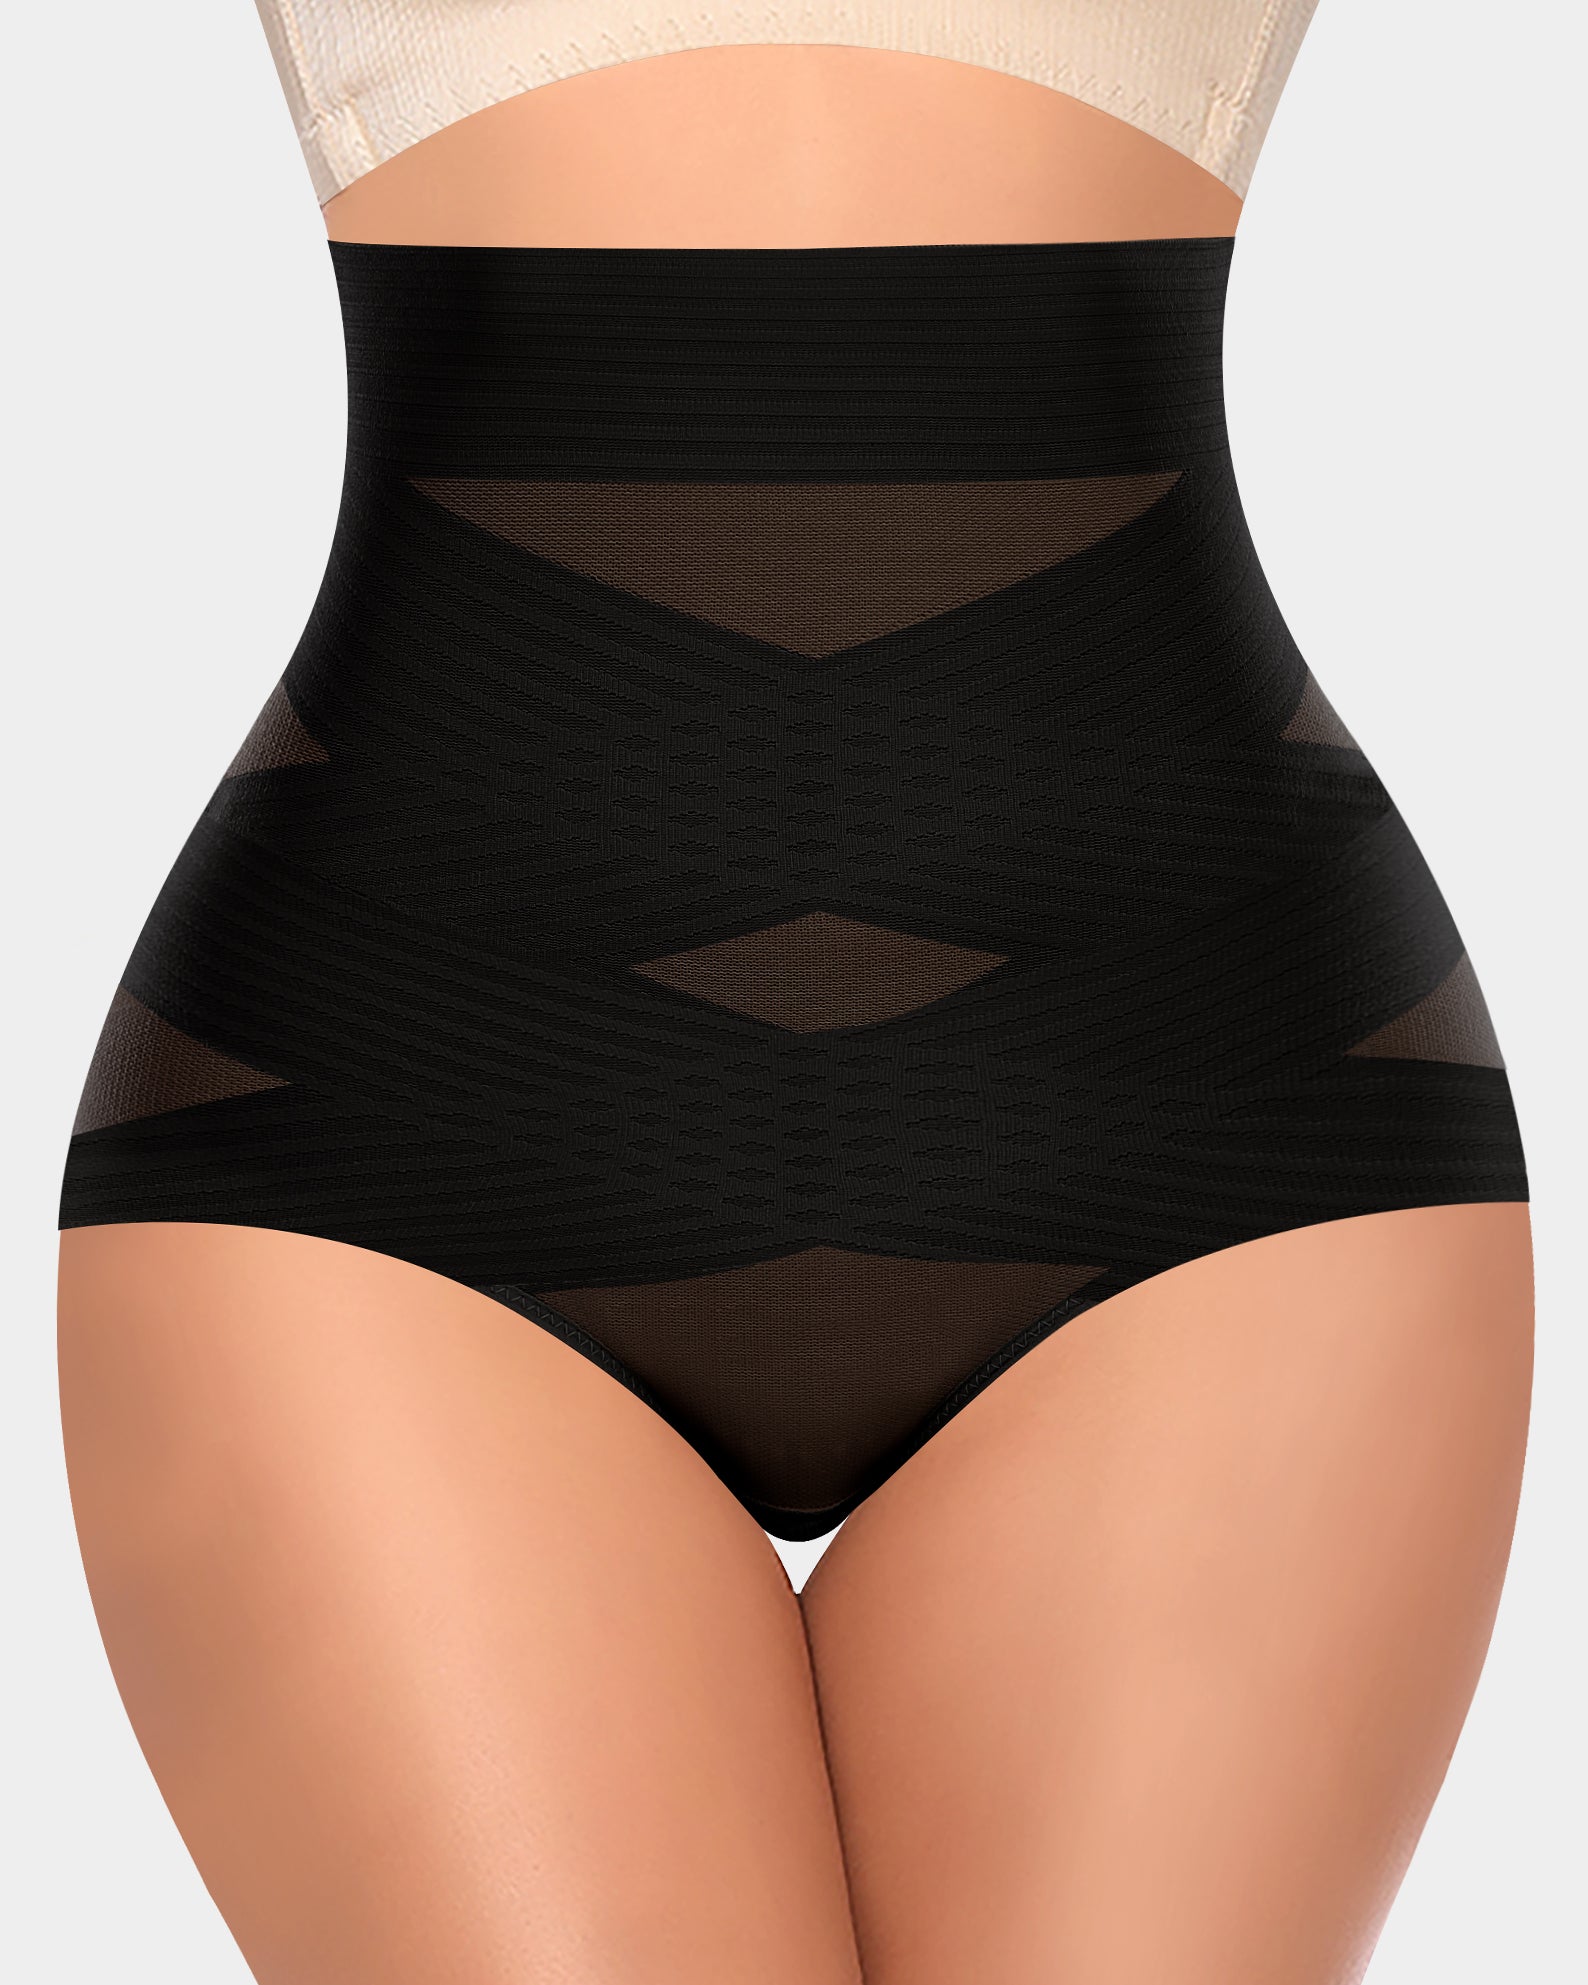 Naturana Invisible Reinforced High Waisted Panty Girdle Perfect Body 0046